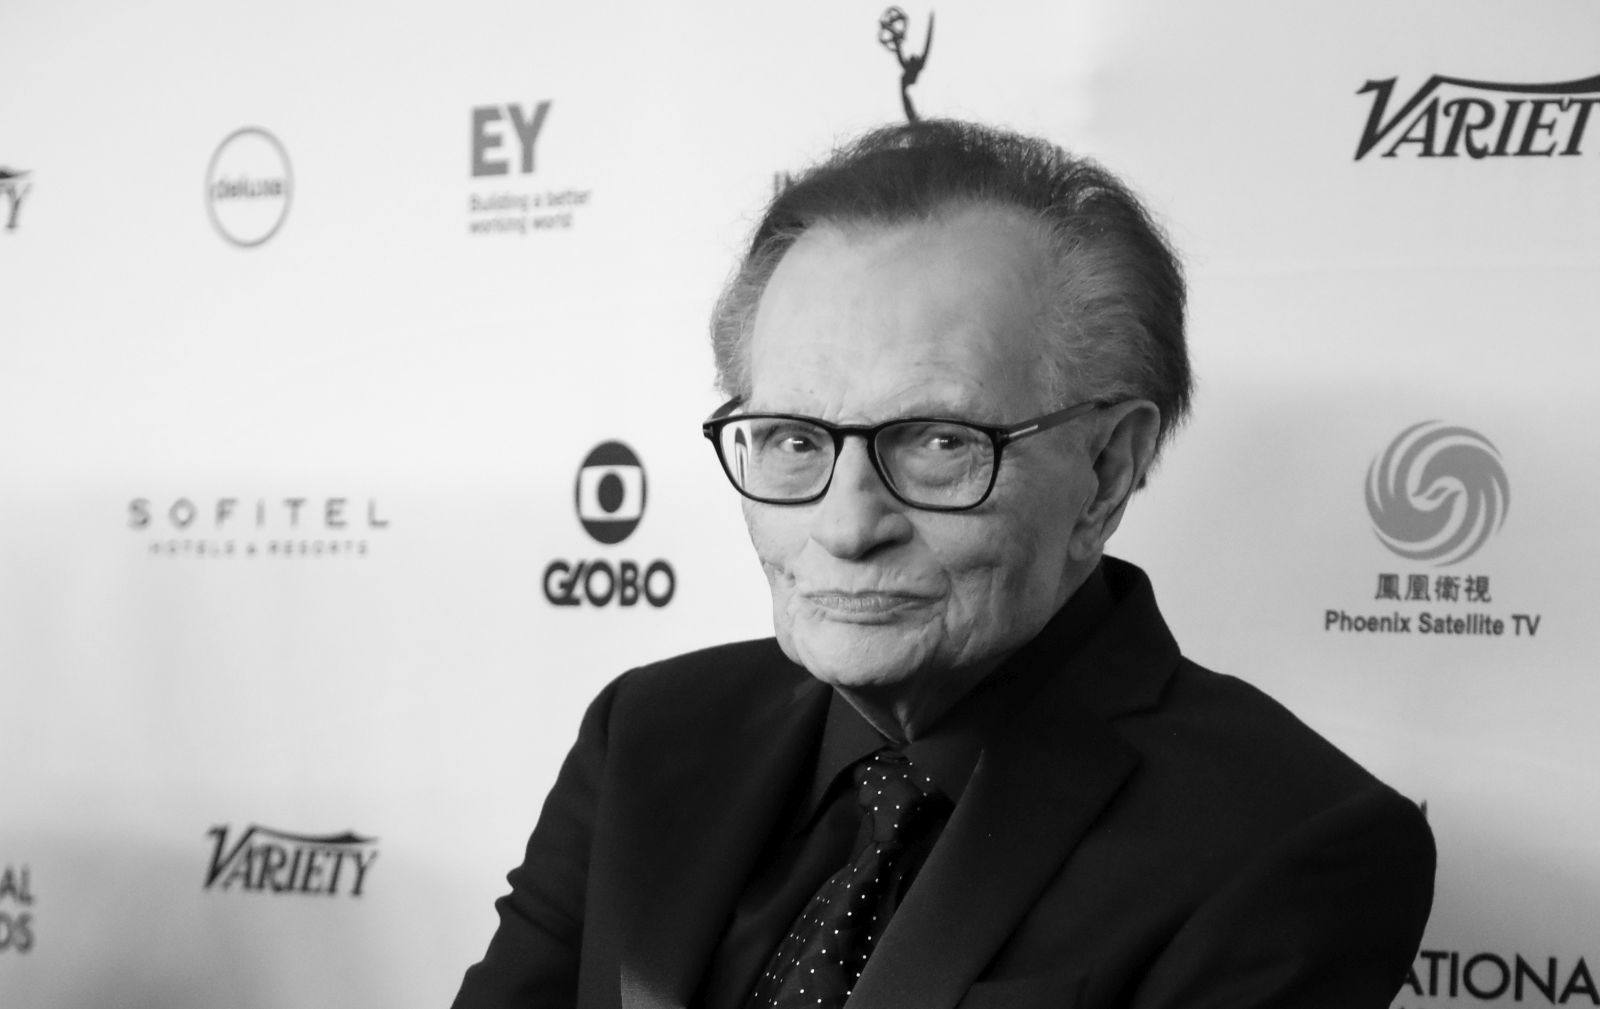 epa08916135 (FILE) - US television host Larry King arrives for the 45th International Emmy Awards Gala at the  New York Hilton hotel in New York, New York, USA, 20 November 2017 (re-issued 02 January 2021). According to media reports on 02 January 2021, Larry King has been hospitalized for 10 days with Covid-19.  EPA/ANDREW GOMBERT *** Local Caption *** 53909131